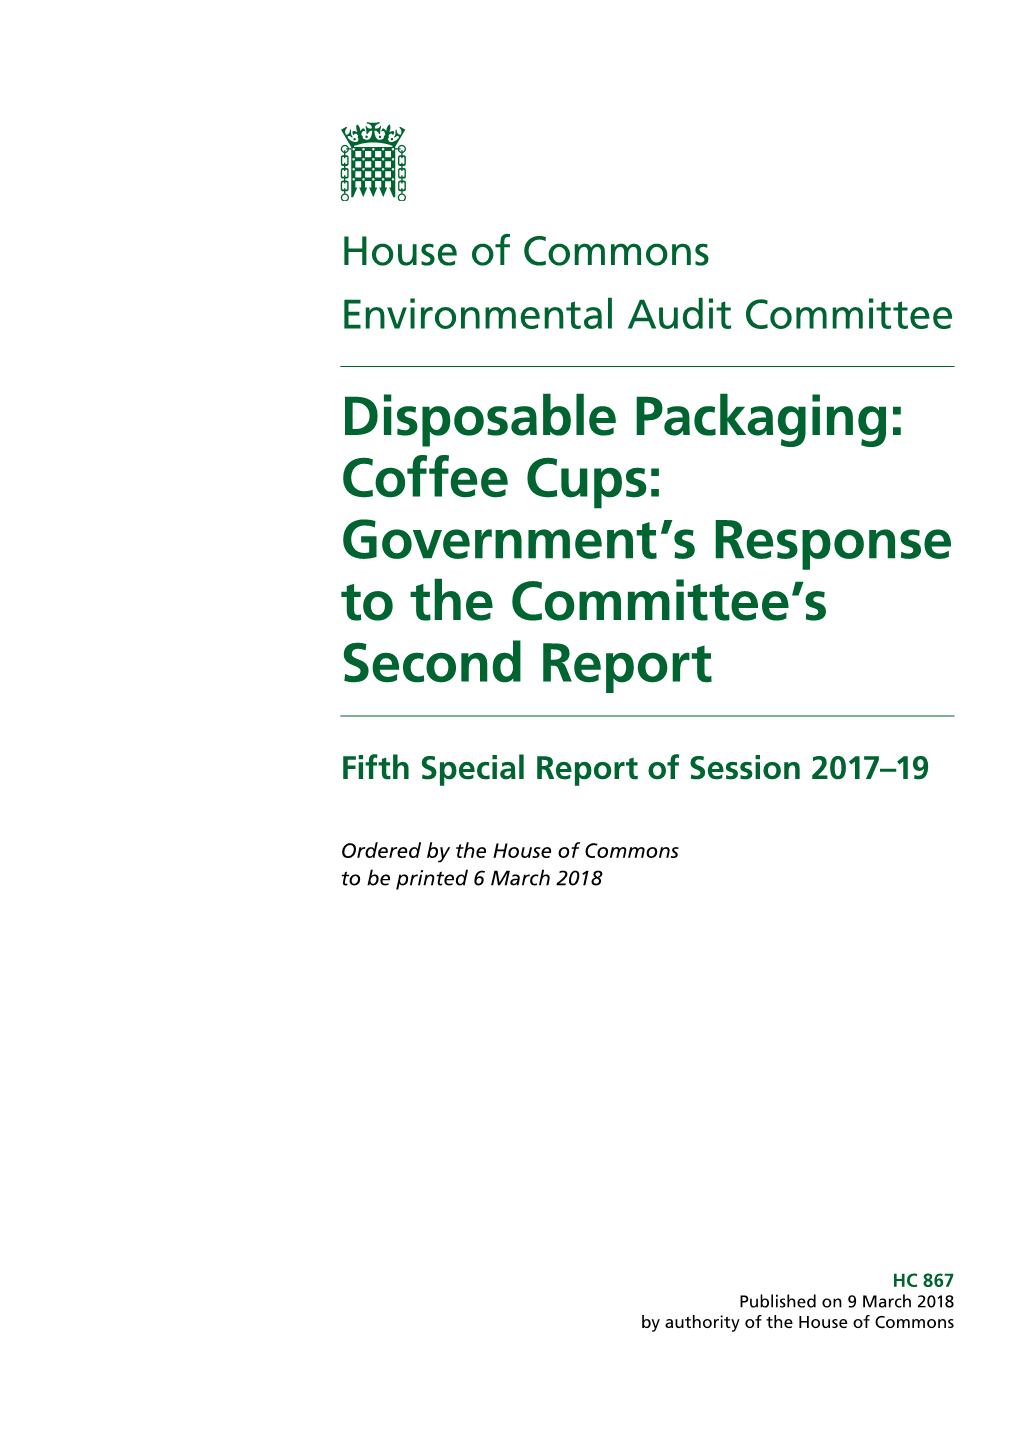 Disposable Packaging: Coffee Cups: Government's Response to the Committee's Second Report